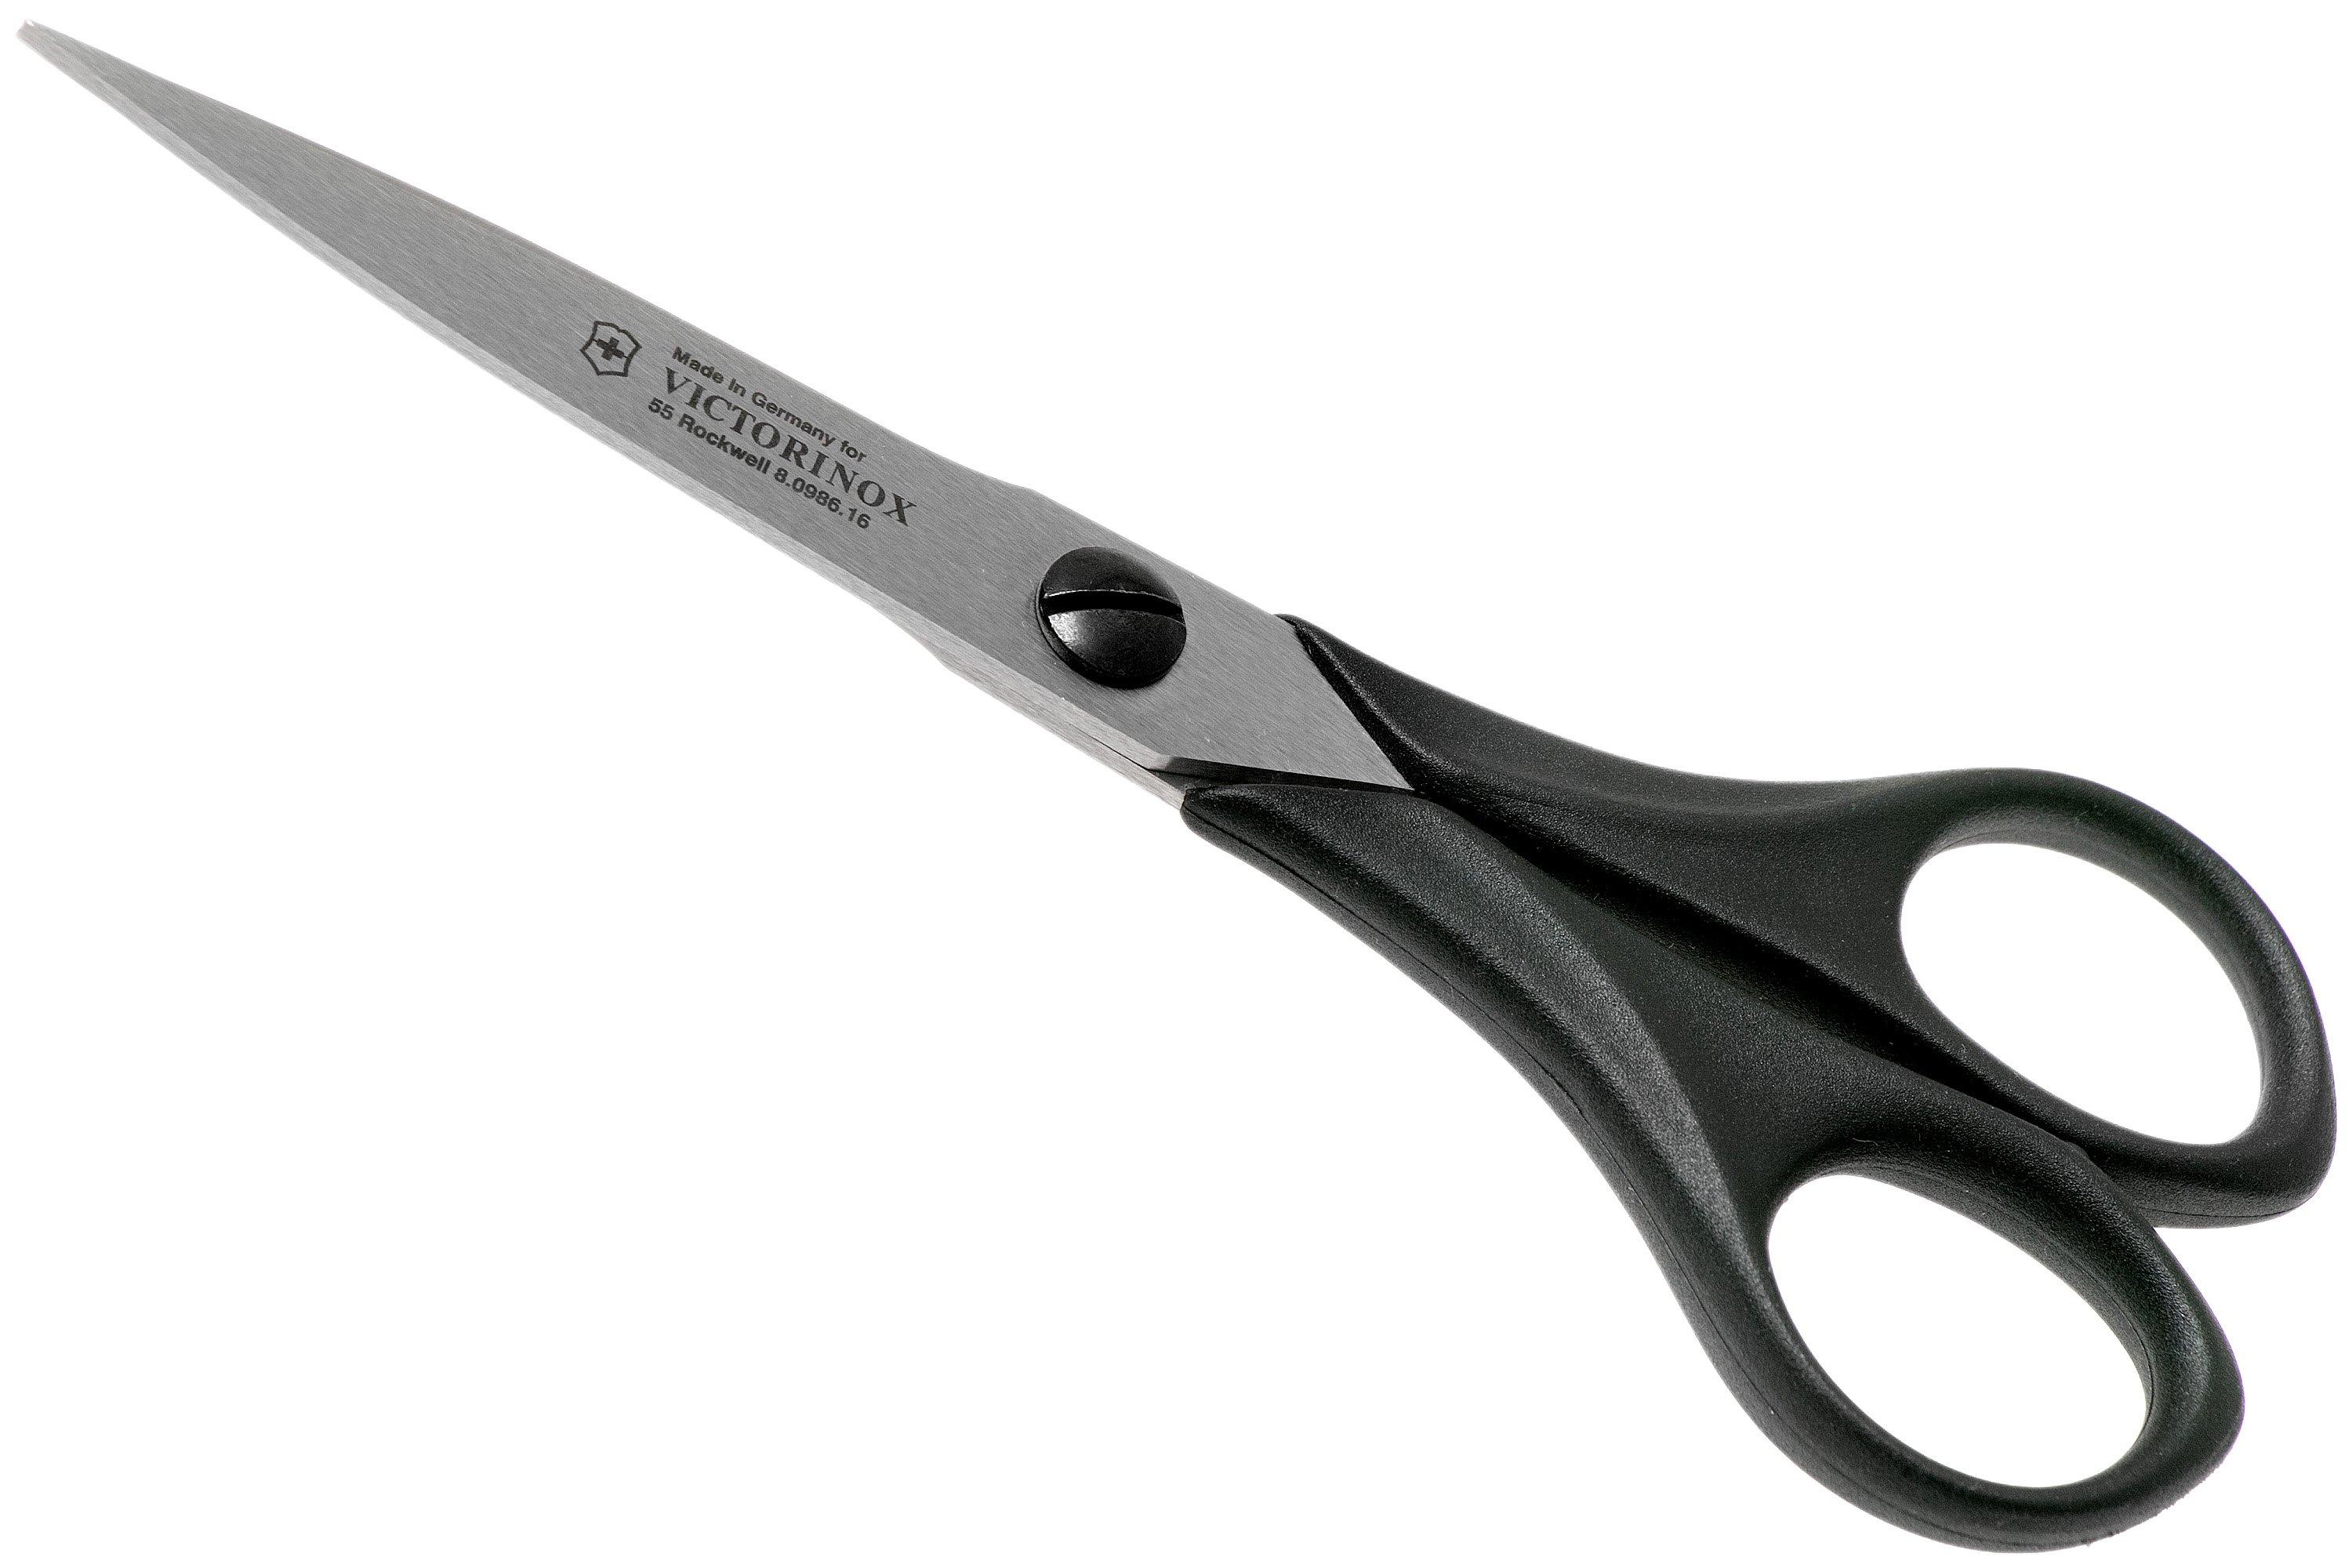 Victorinox Stainless Steel 8.0986.16, 16 cm household scissors |  Advantageously shopping at